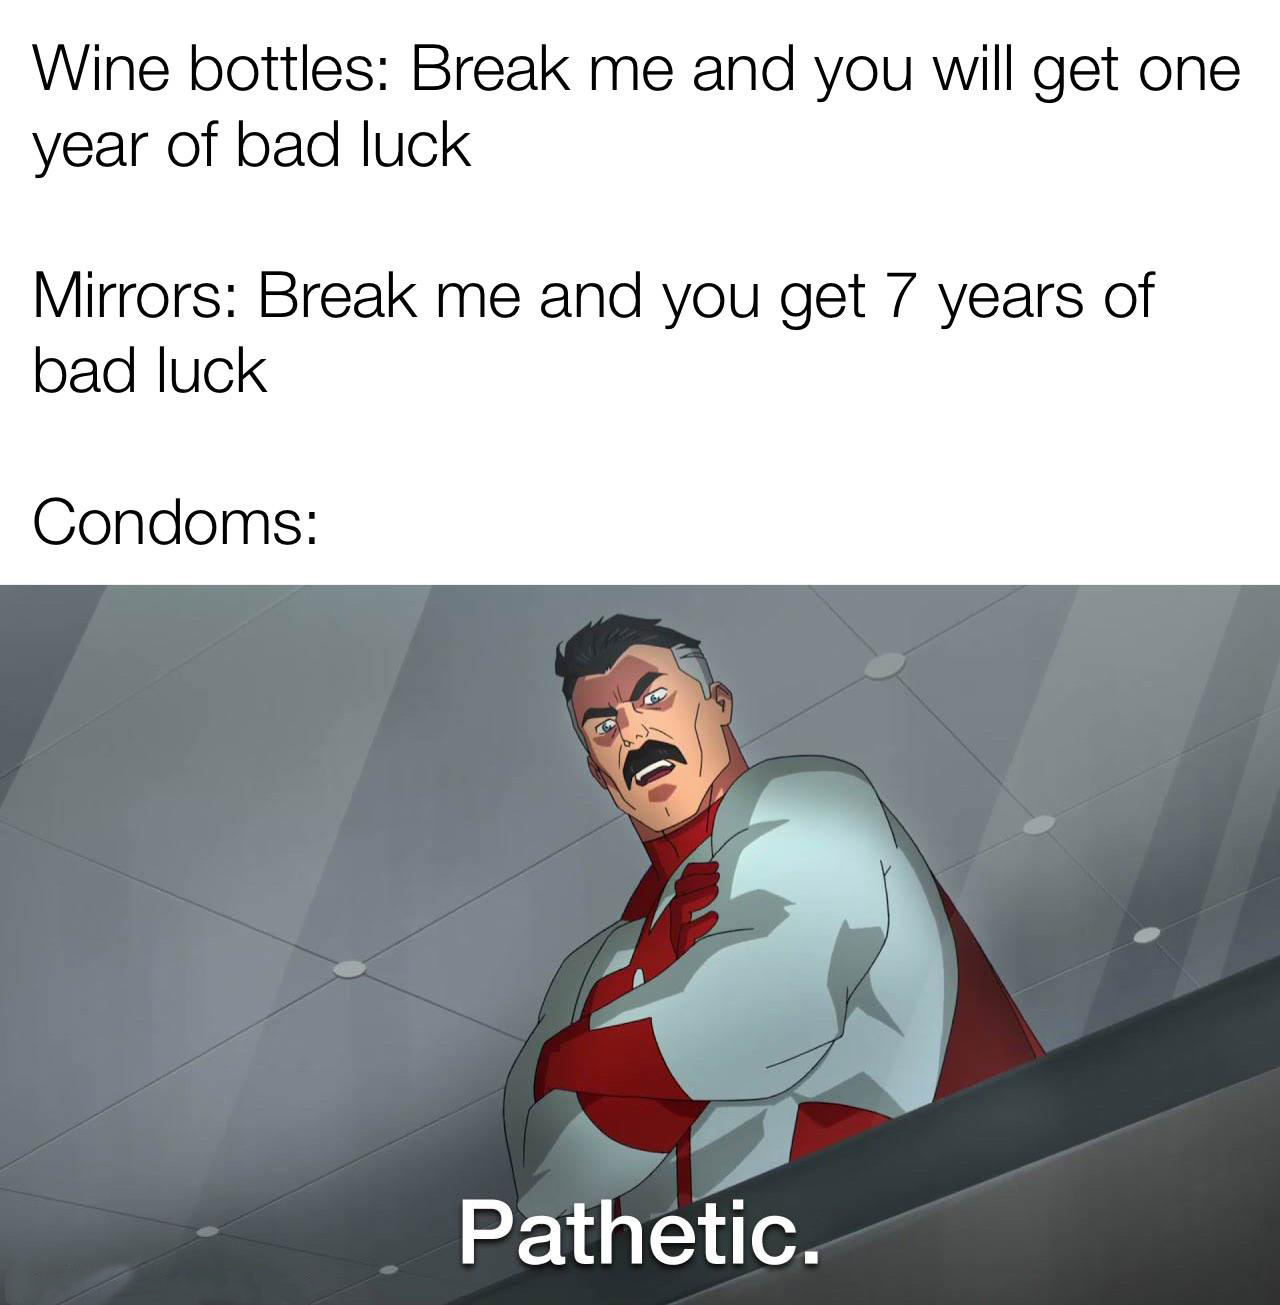 shower memes - Wine bottles Break me and you will get one year of bad luck Mirrors Break me and you get 7 years of bad luck Condoms Pathetic.